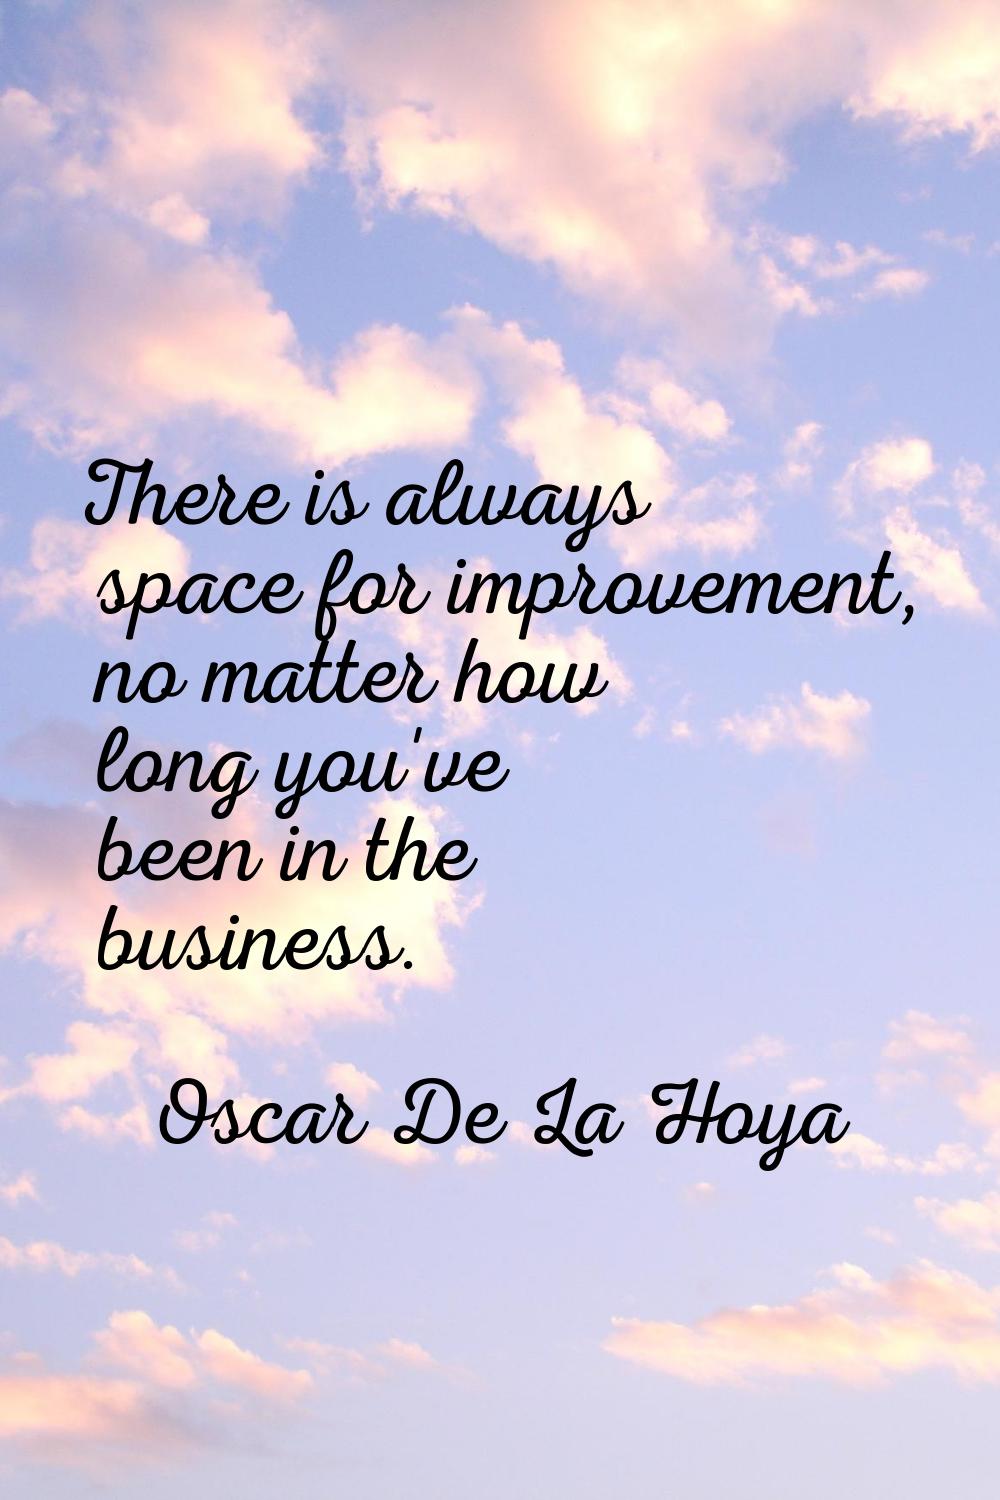 There is always space for improvement, no matter how long you've been in the business.